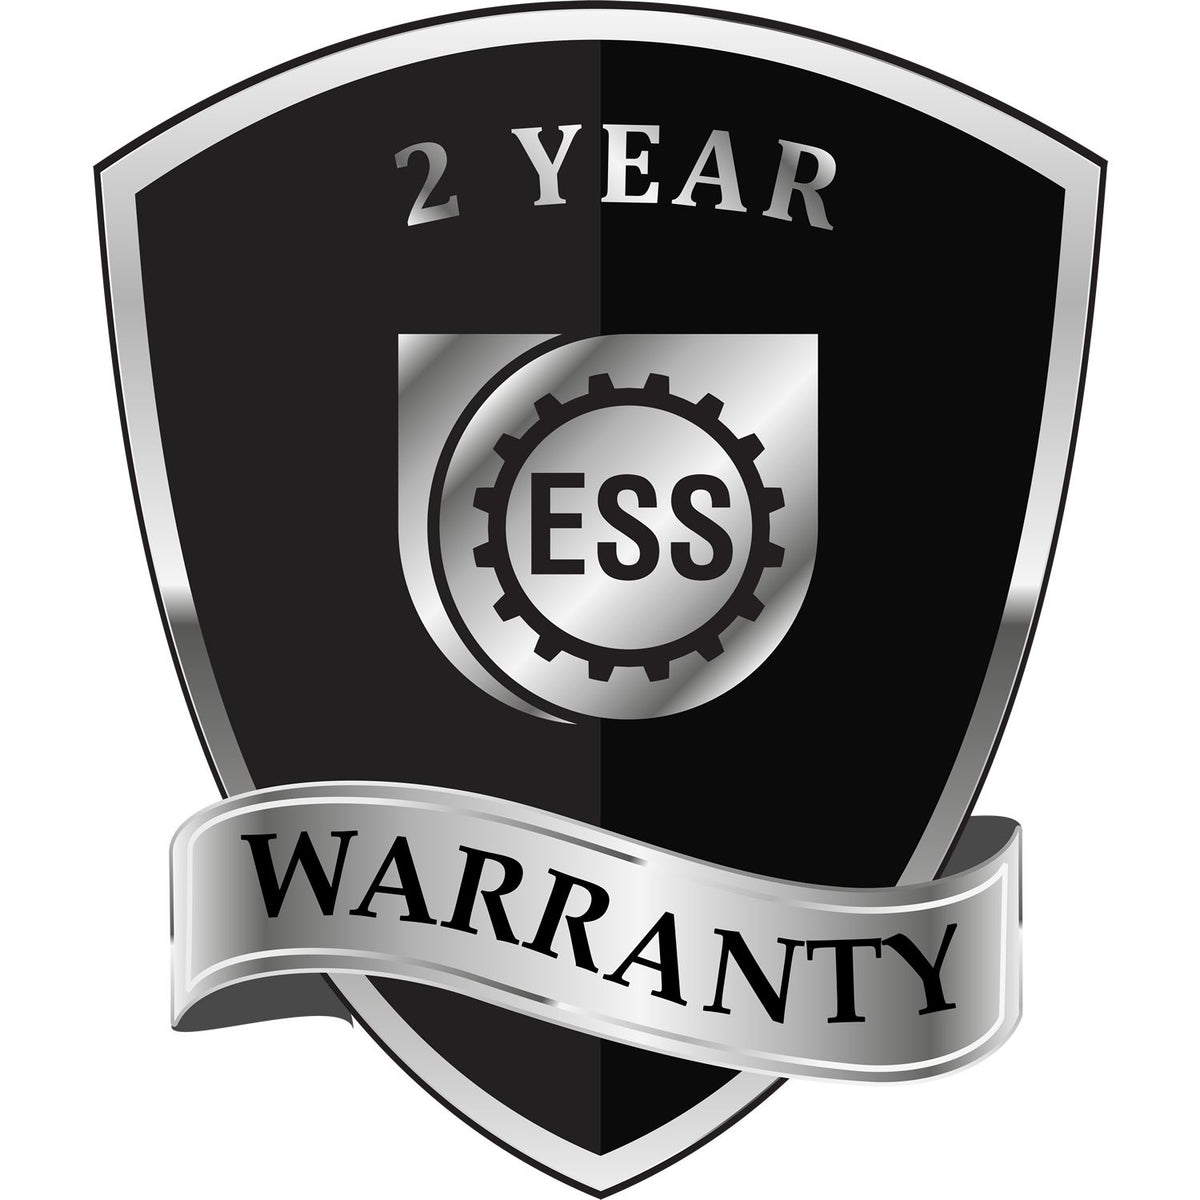 A black and silver badge or emblem showing warranty information for the Hybrid Vermont Geologist Seal